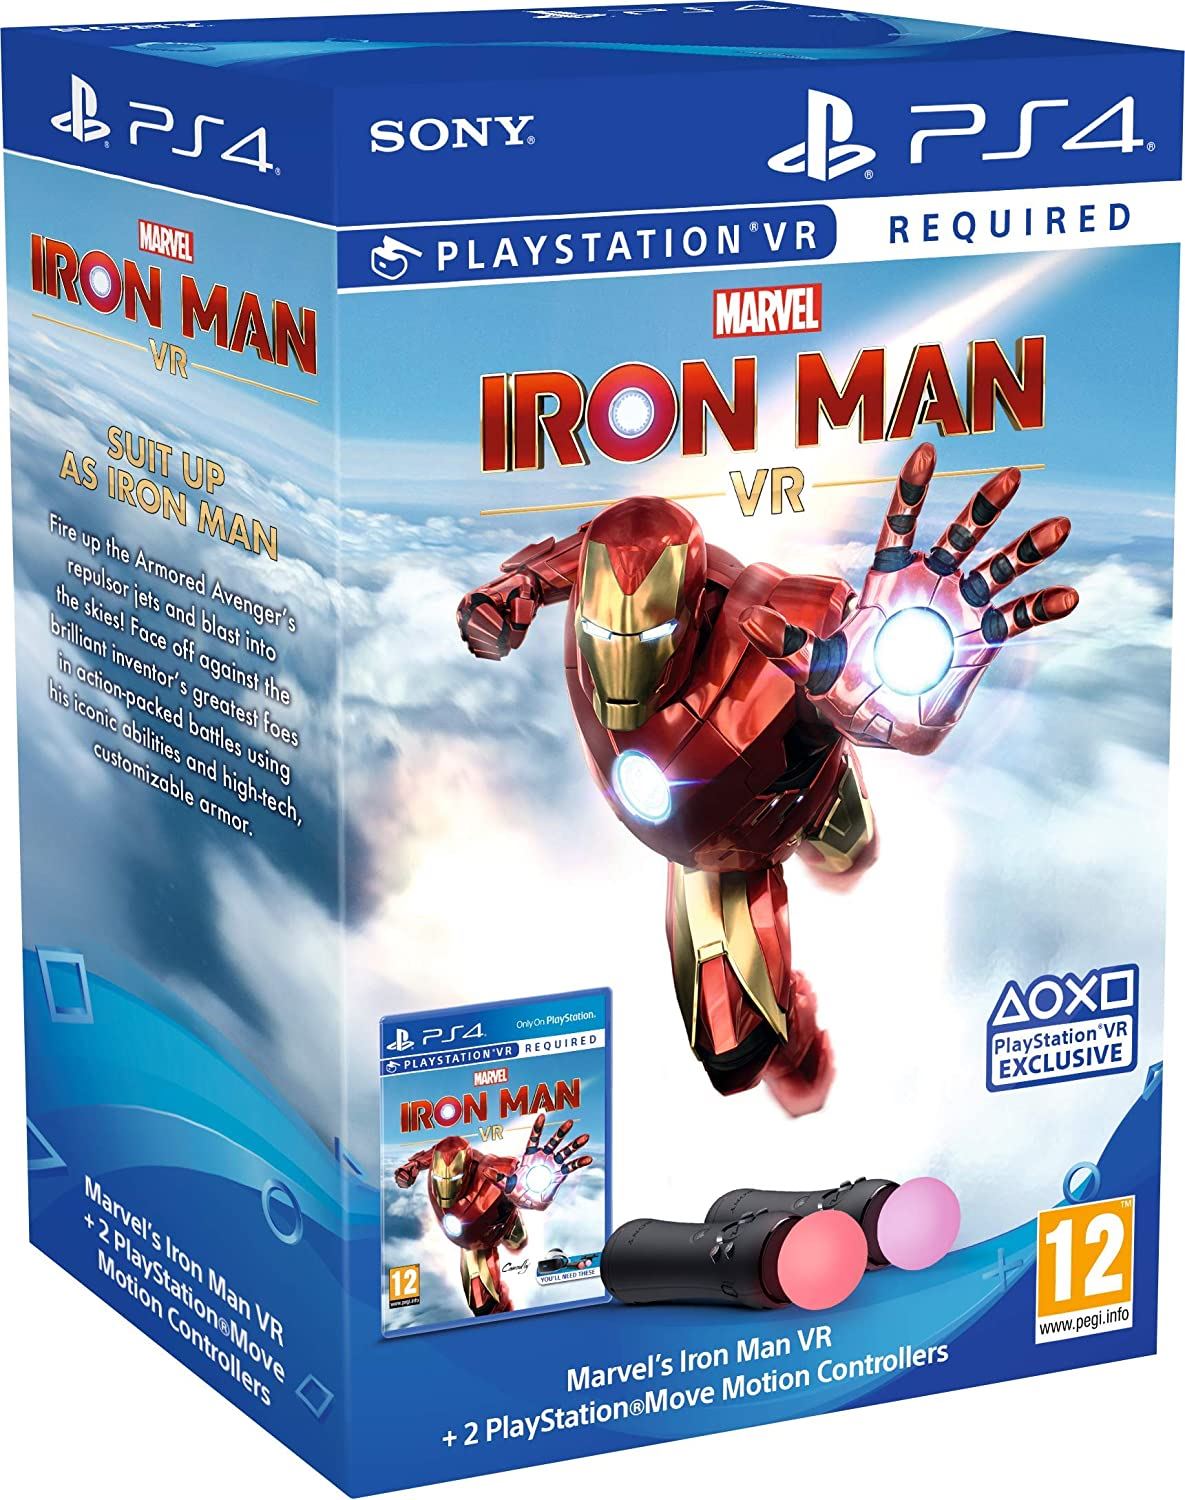 Marvel's Iron Man VR + 2 PlayStation Move Motion Controllers